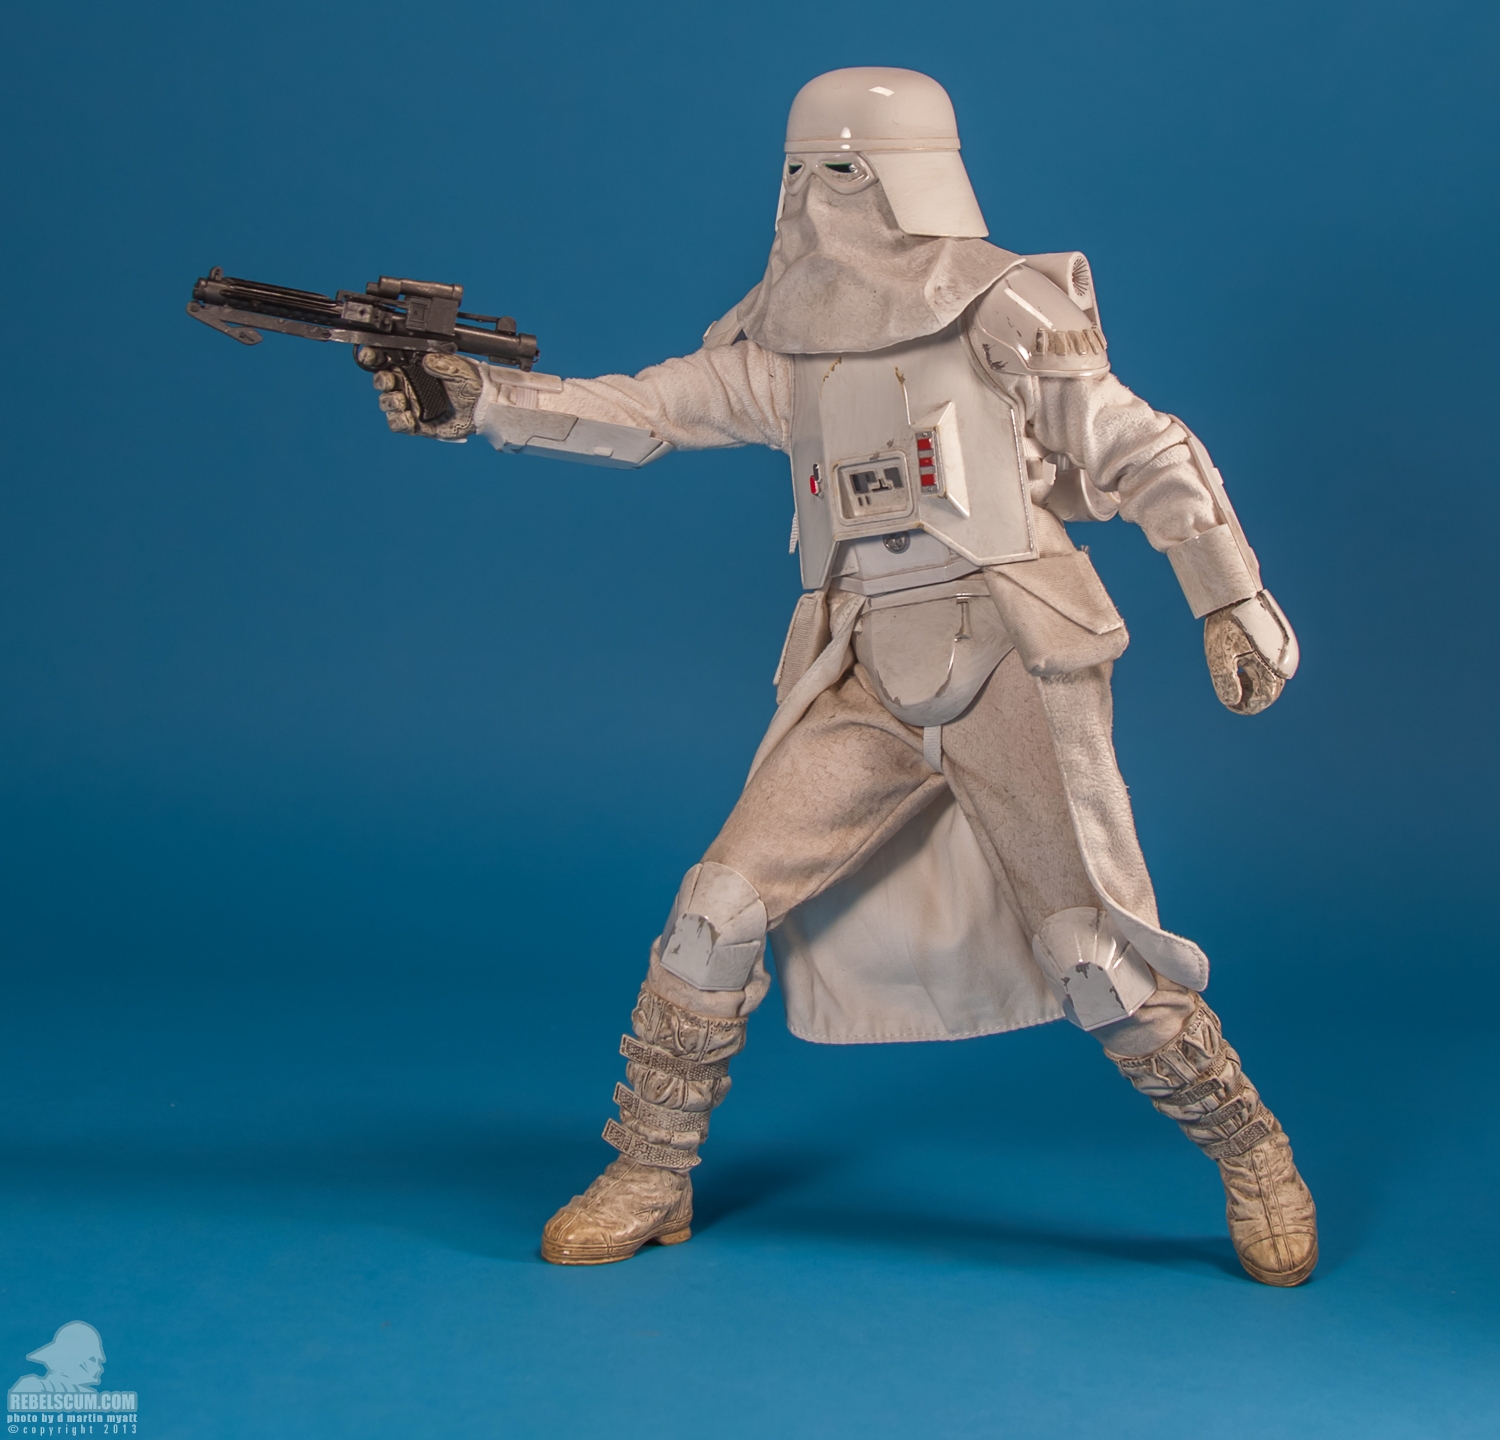 Snowtrooper_Militaries_Of_Star_Wars_Sideshow_Collectibles-11.jpg